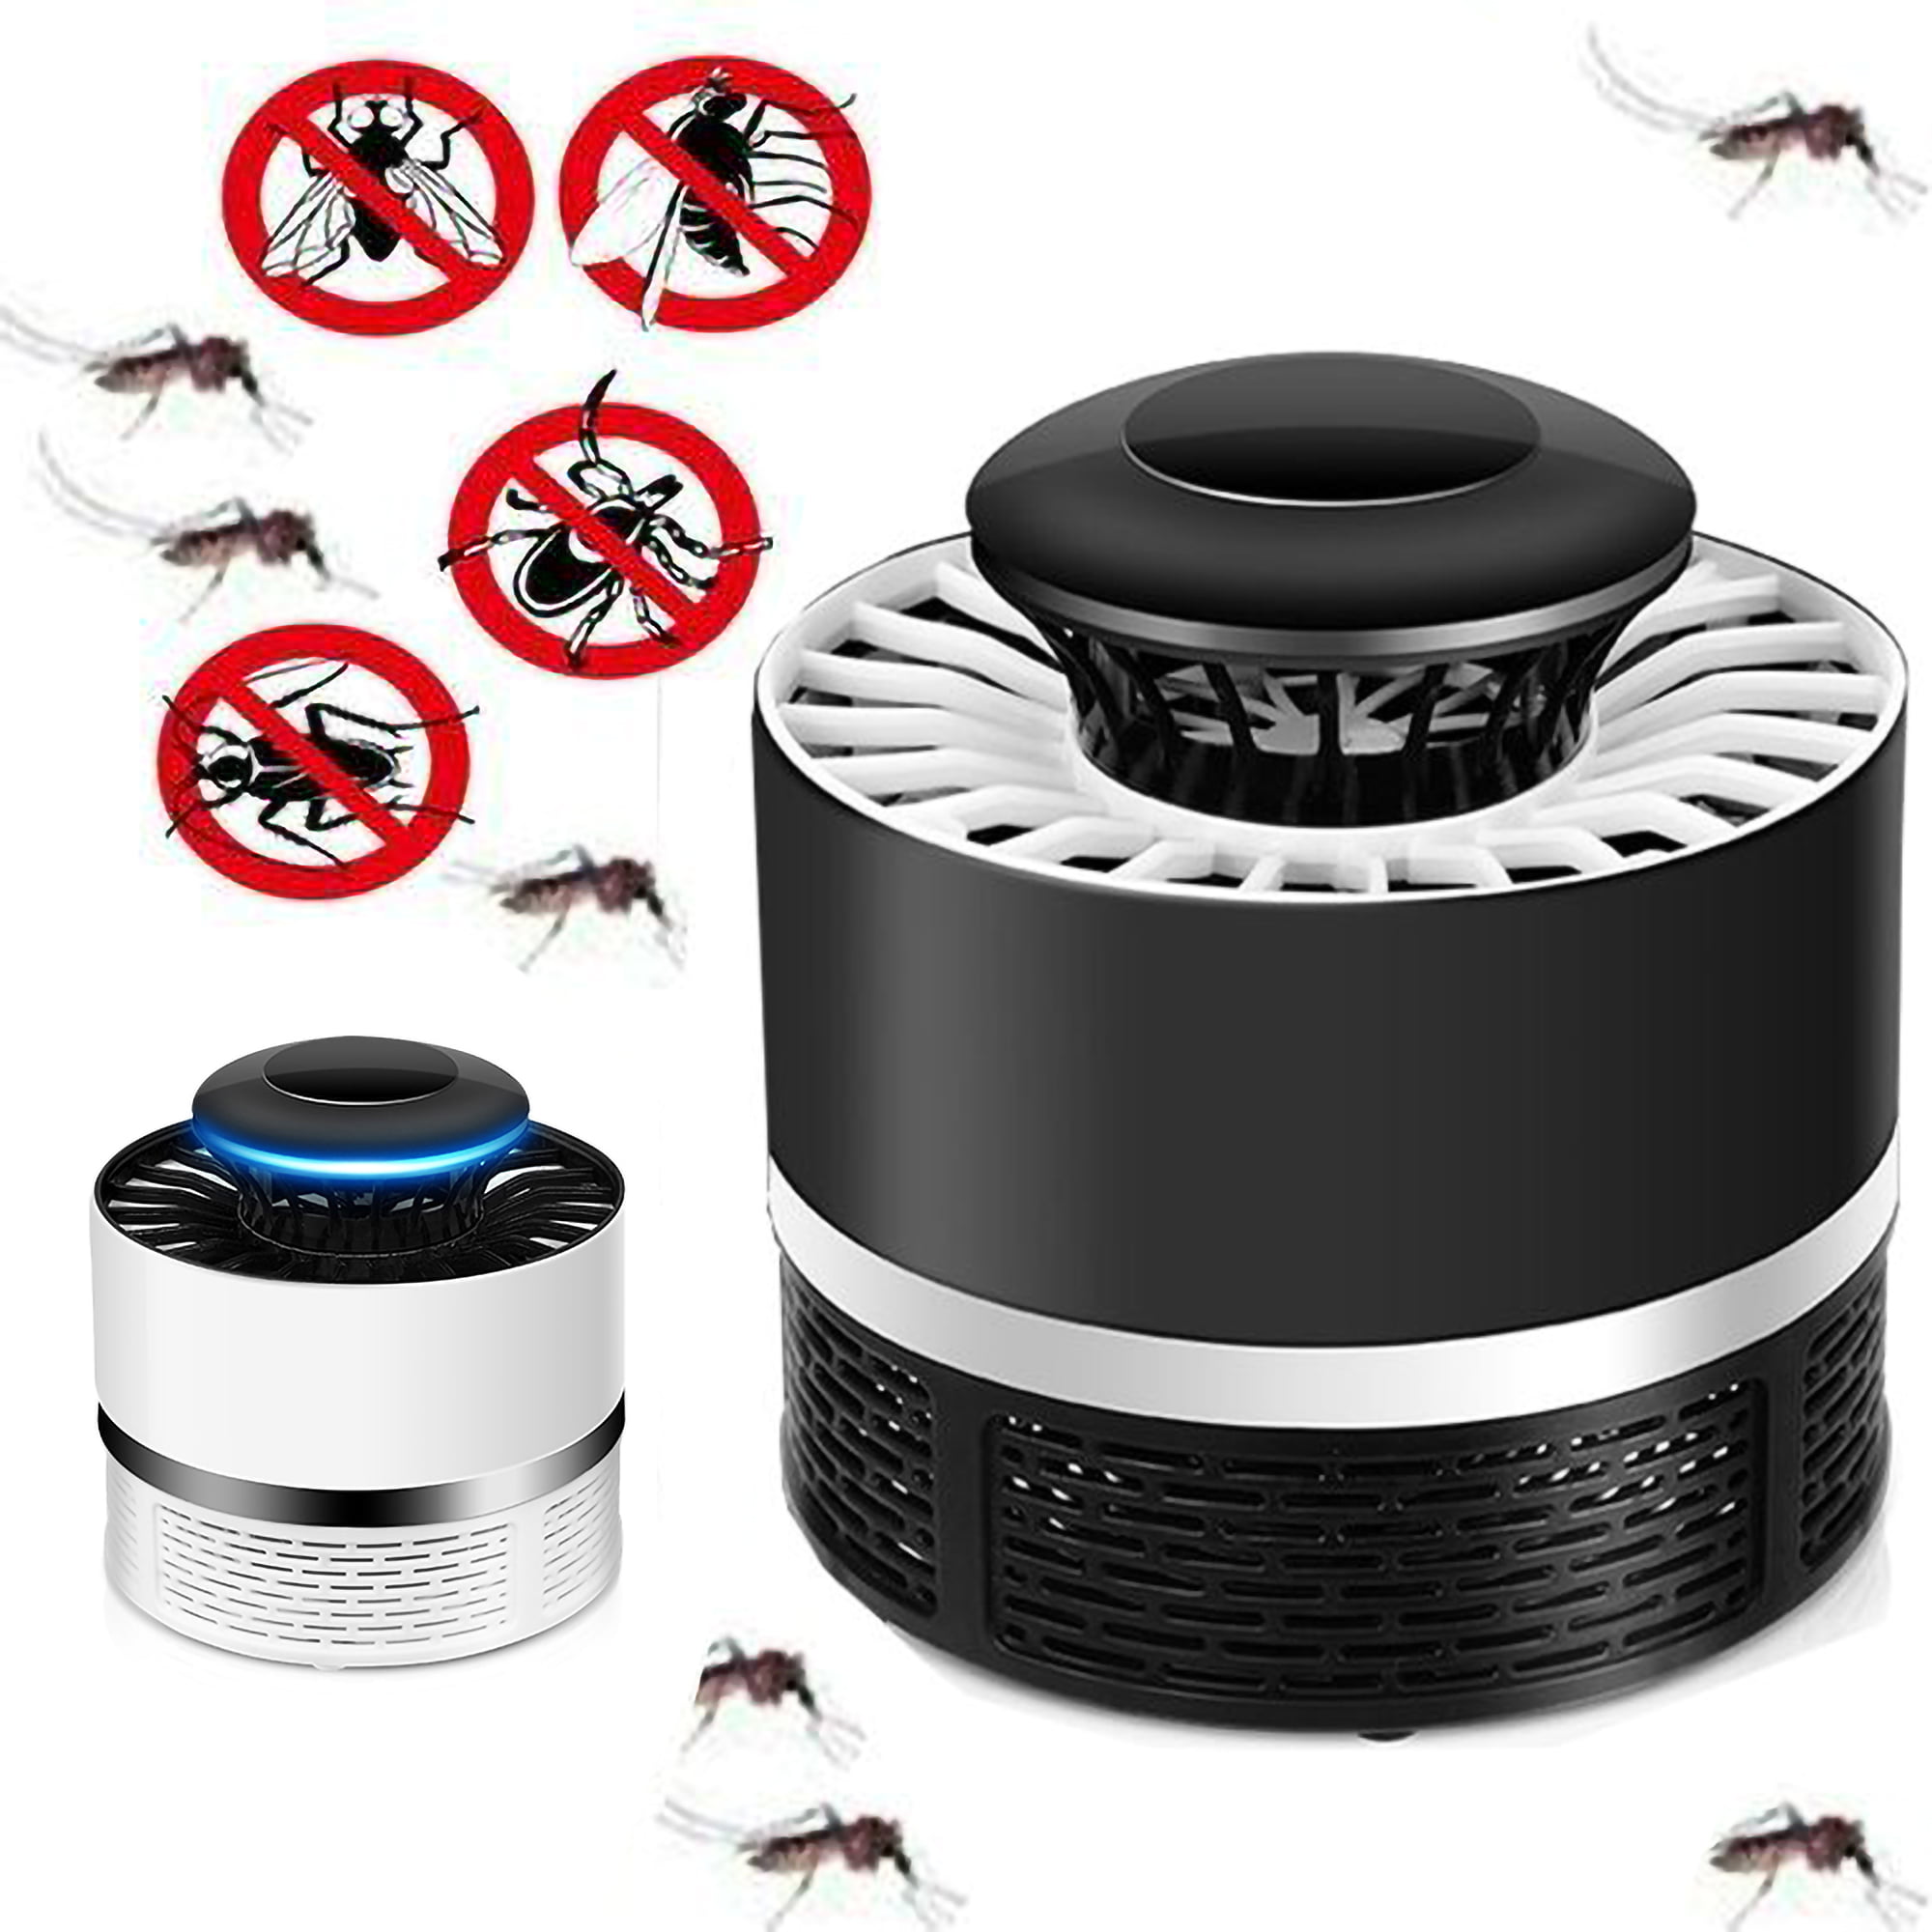 Electric UV Light Mosquito Killer Bugs Insect Grill Fly USB Trap Catcher Lamp IE 